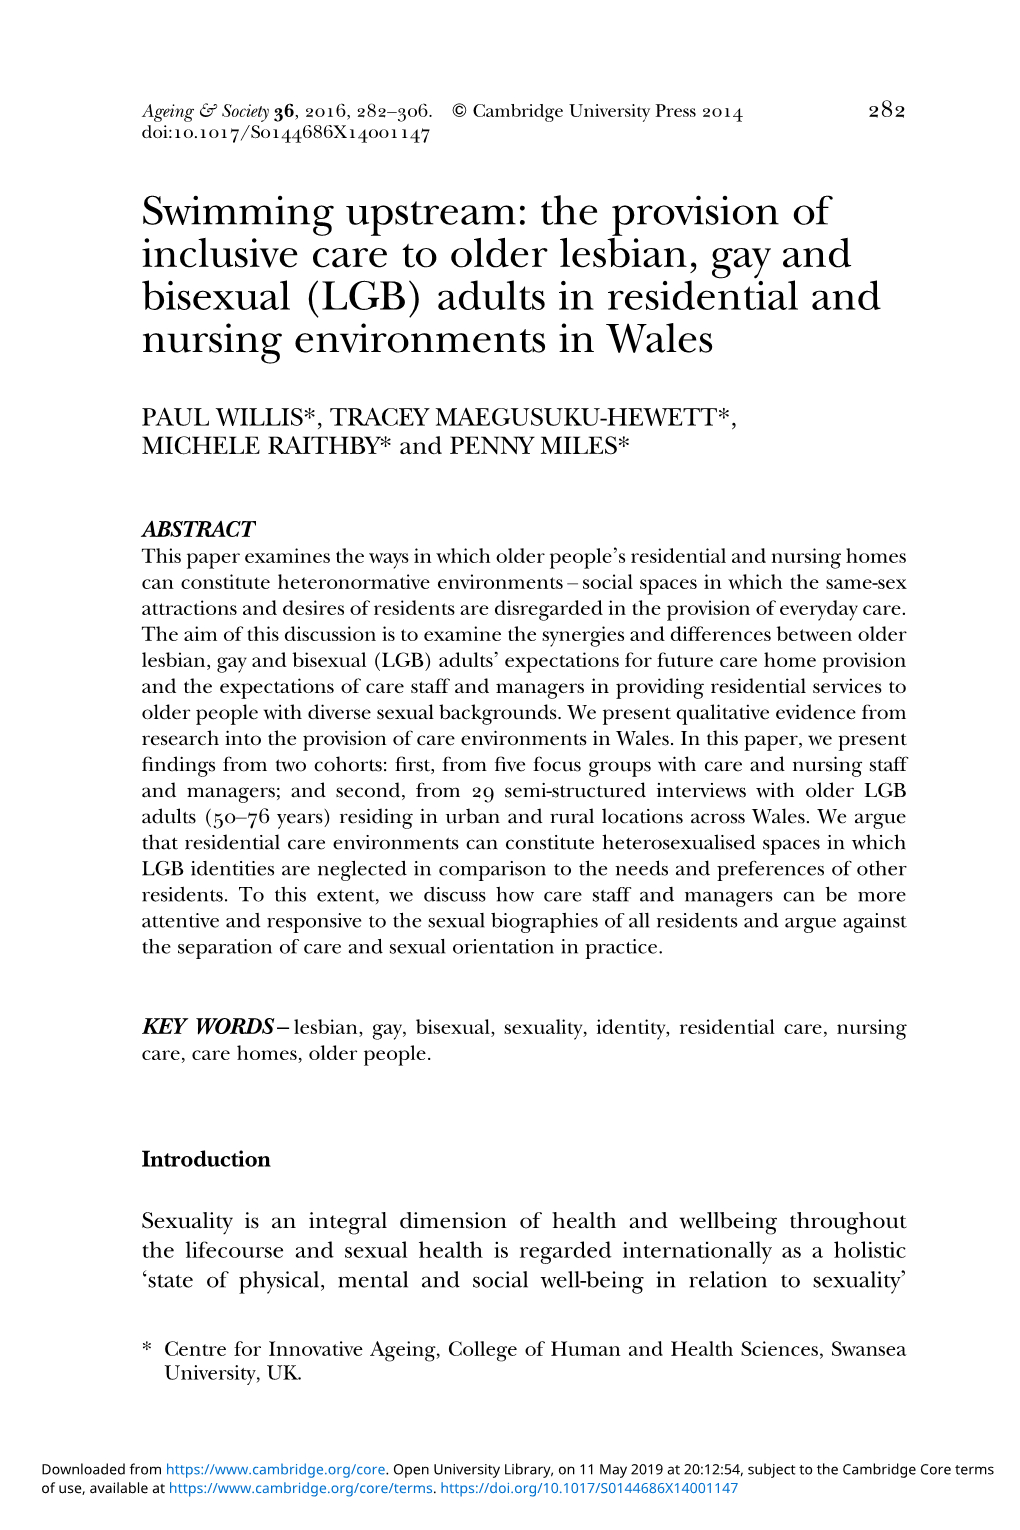 Swimming Upstream: the Provision of Inclusive Care to Older Lesbian, Gay and Bisexual (LGB) Adults in Residential and Nursing Environments in Wales